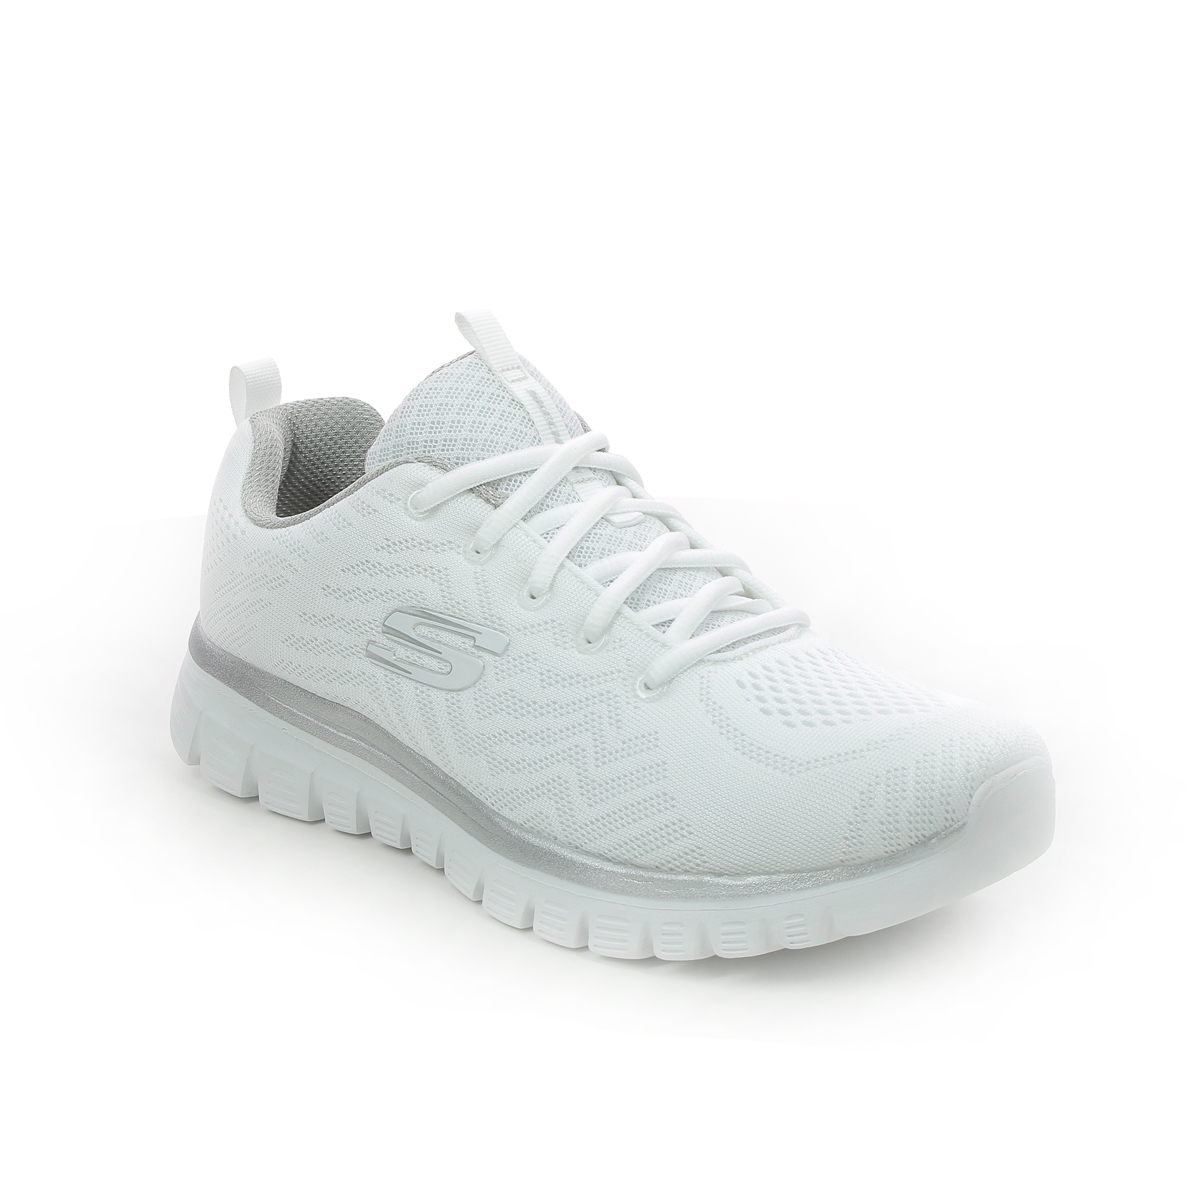 Skechers Get Connected White-Silver Womens Trainers 12615 In Size 7 In Plain White-Silver